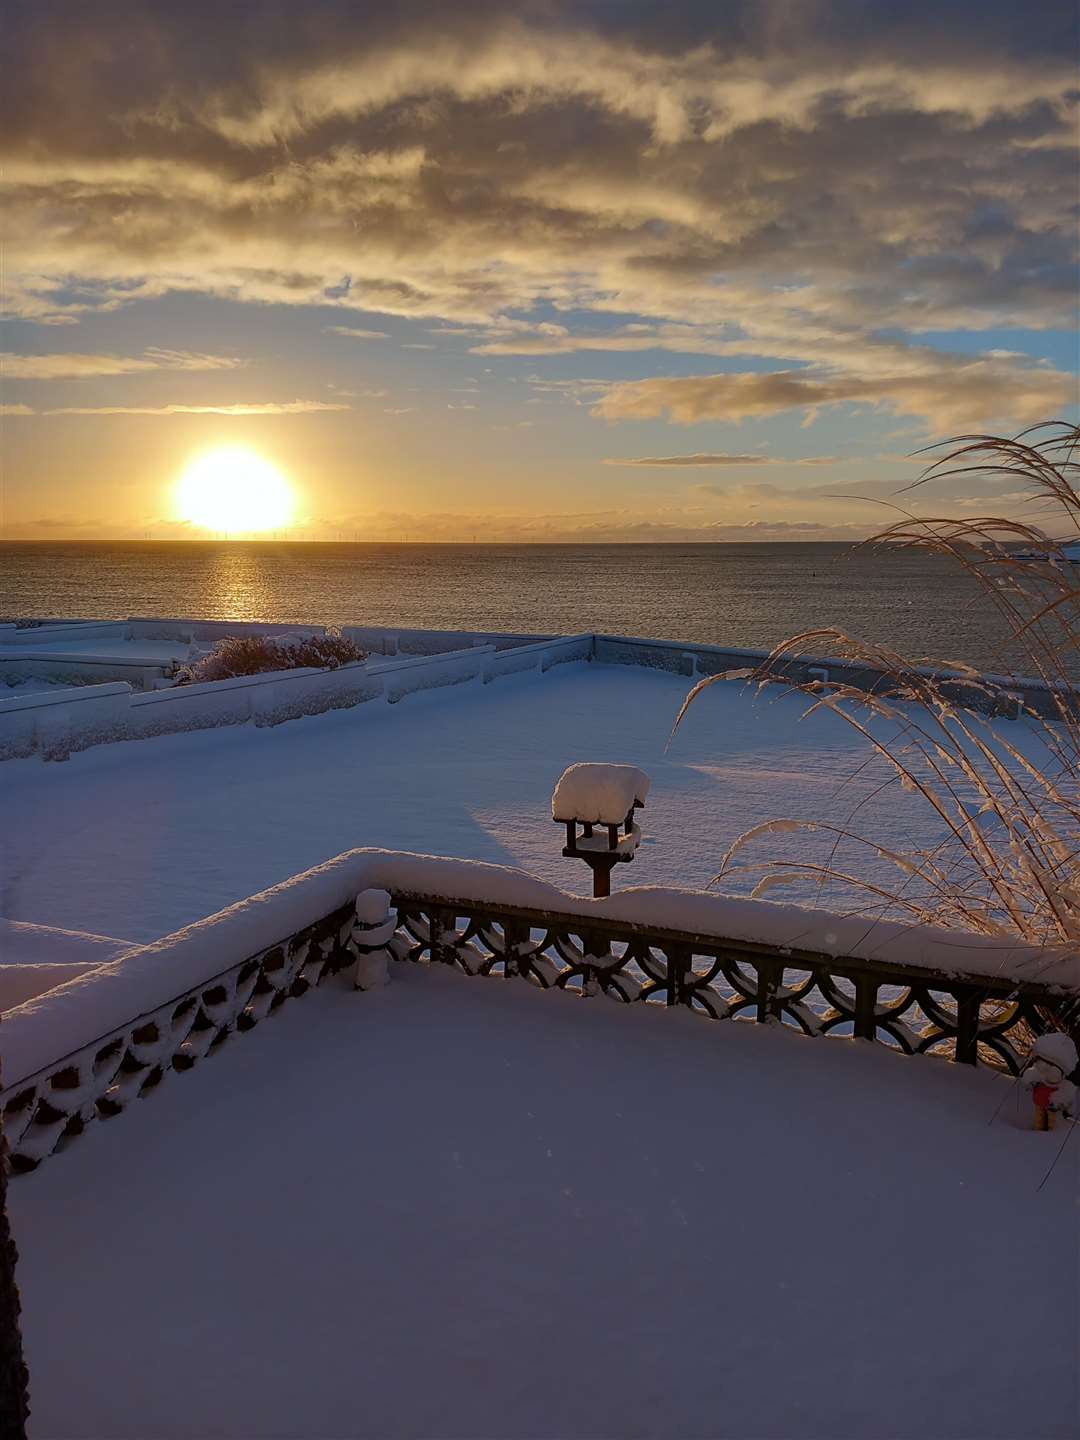 Raymond Macdonald sent this photograph of the sunrise in Wick in the snow.